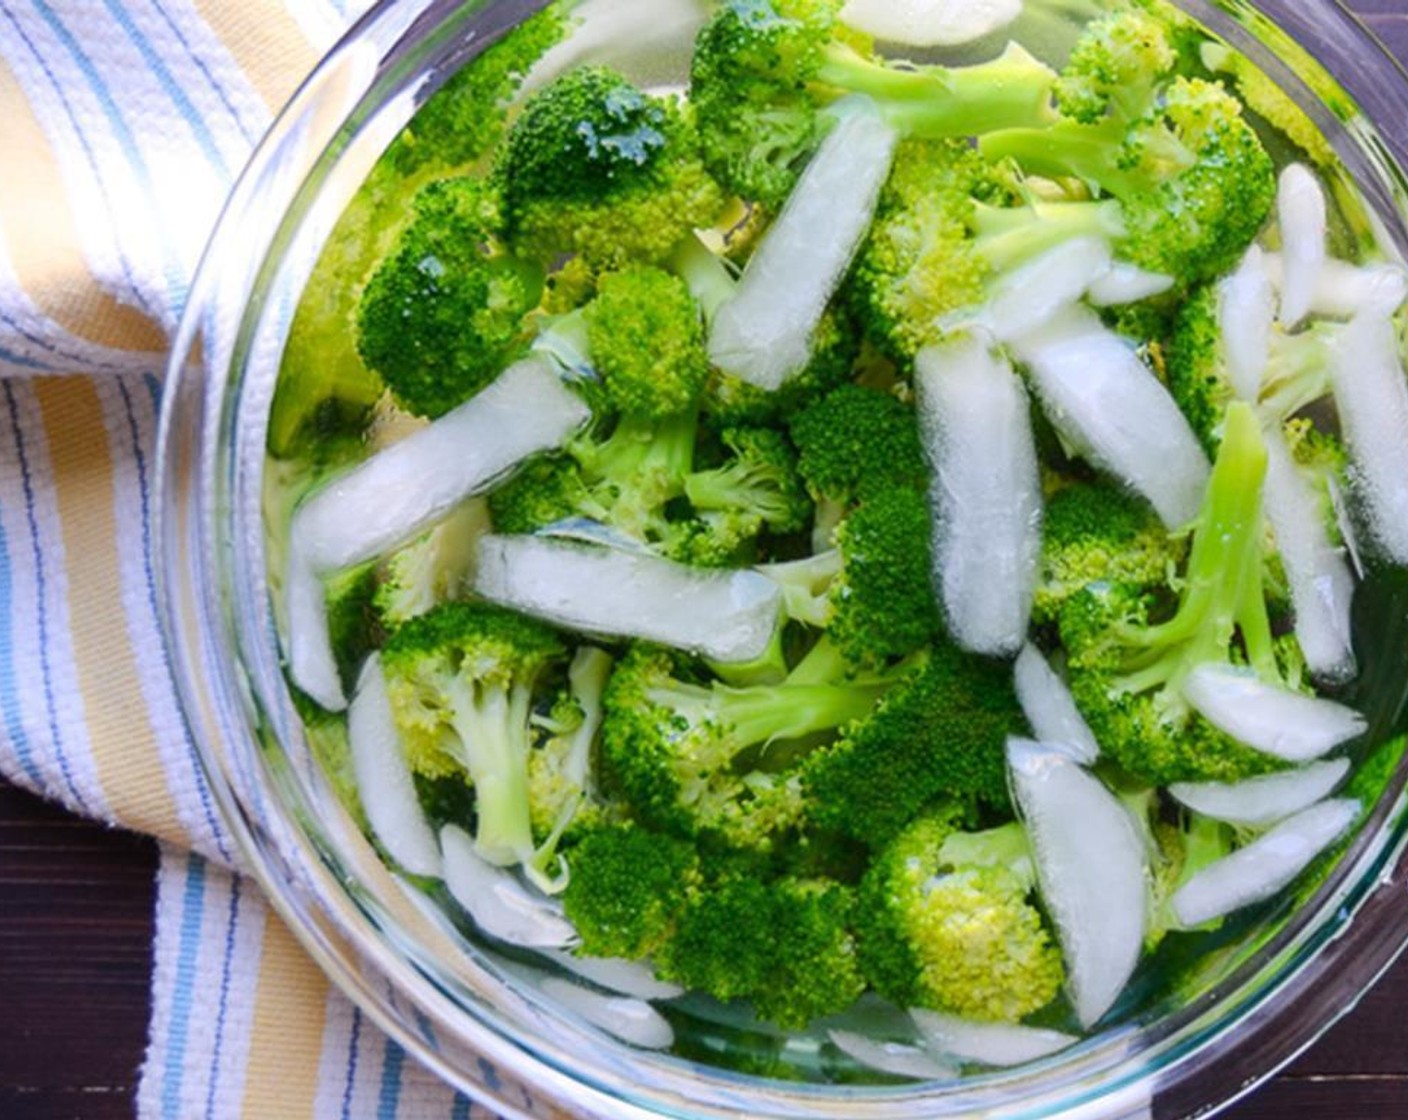 step 5 Use a slotted spoon or spider to transfer the broccoli from the boiling water to the ice bath to shock it.